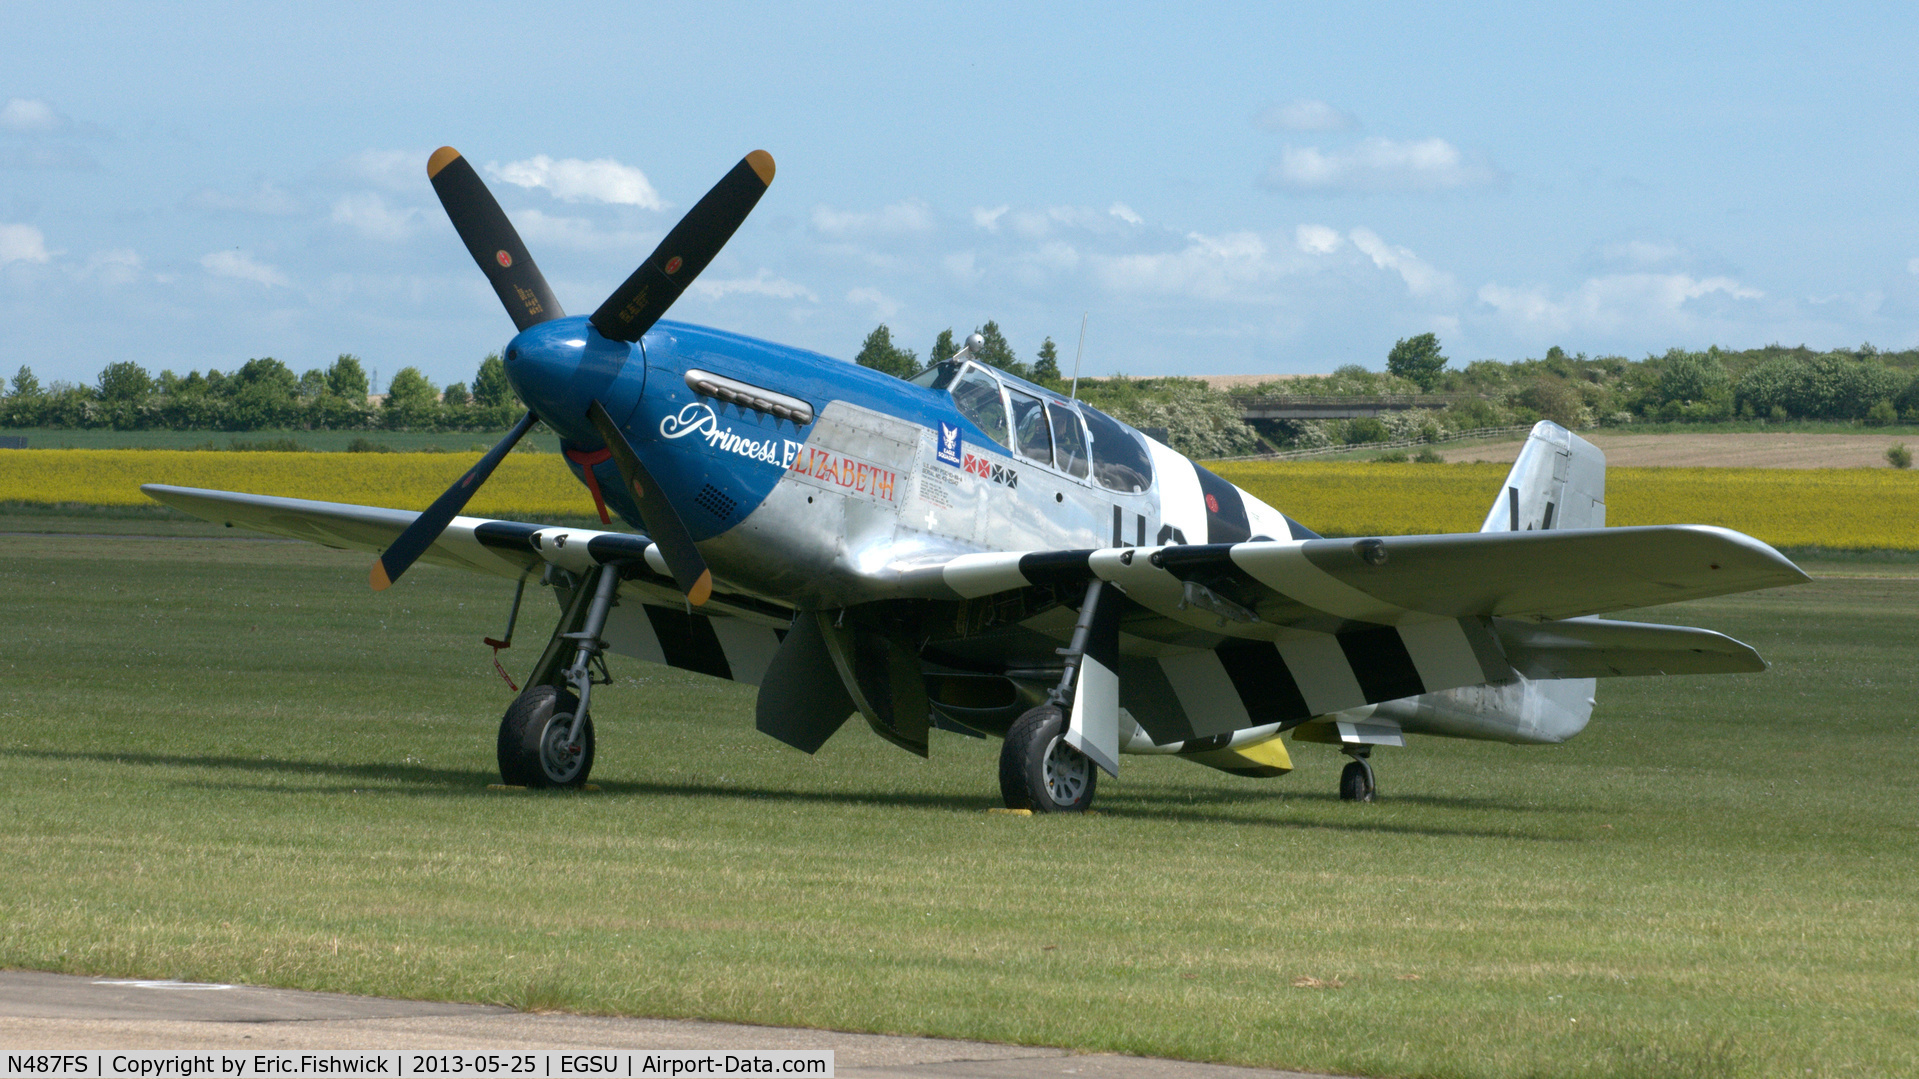 N487FS, 1943 North American P-51C Mustang C/N 103-26778, 3. 'Princess Elizabeth' at the IWM Spring Airshow, May 2013. (One of the Stars remembering the Mighty Eighth.)